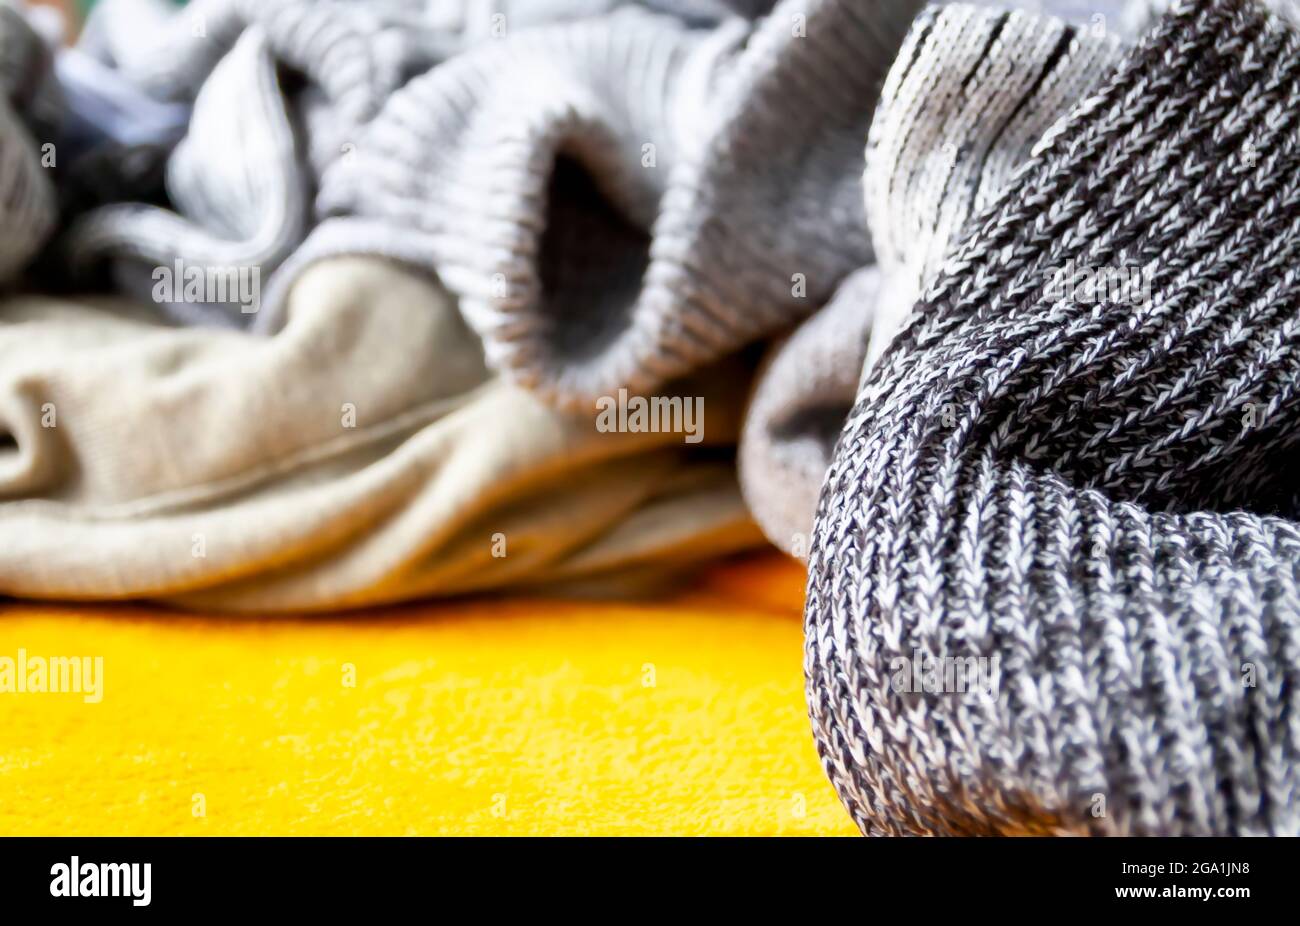 Warm knitted jumpers and sweaters on bright yellow background. Stock Photo